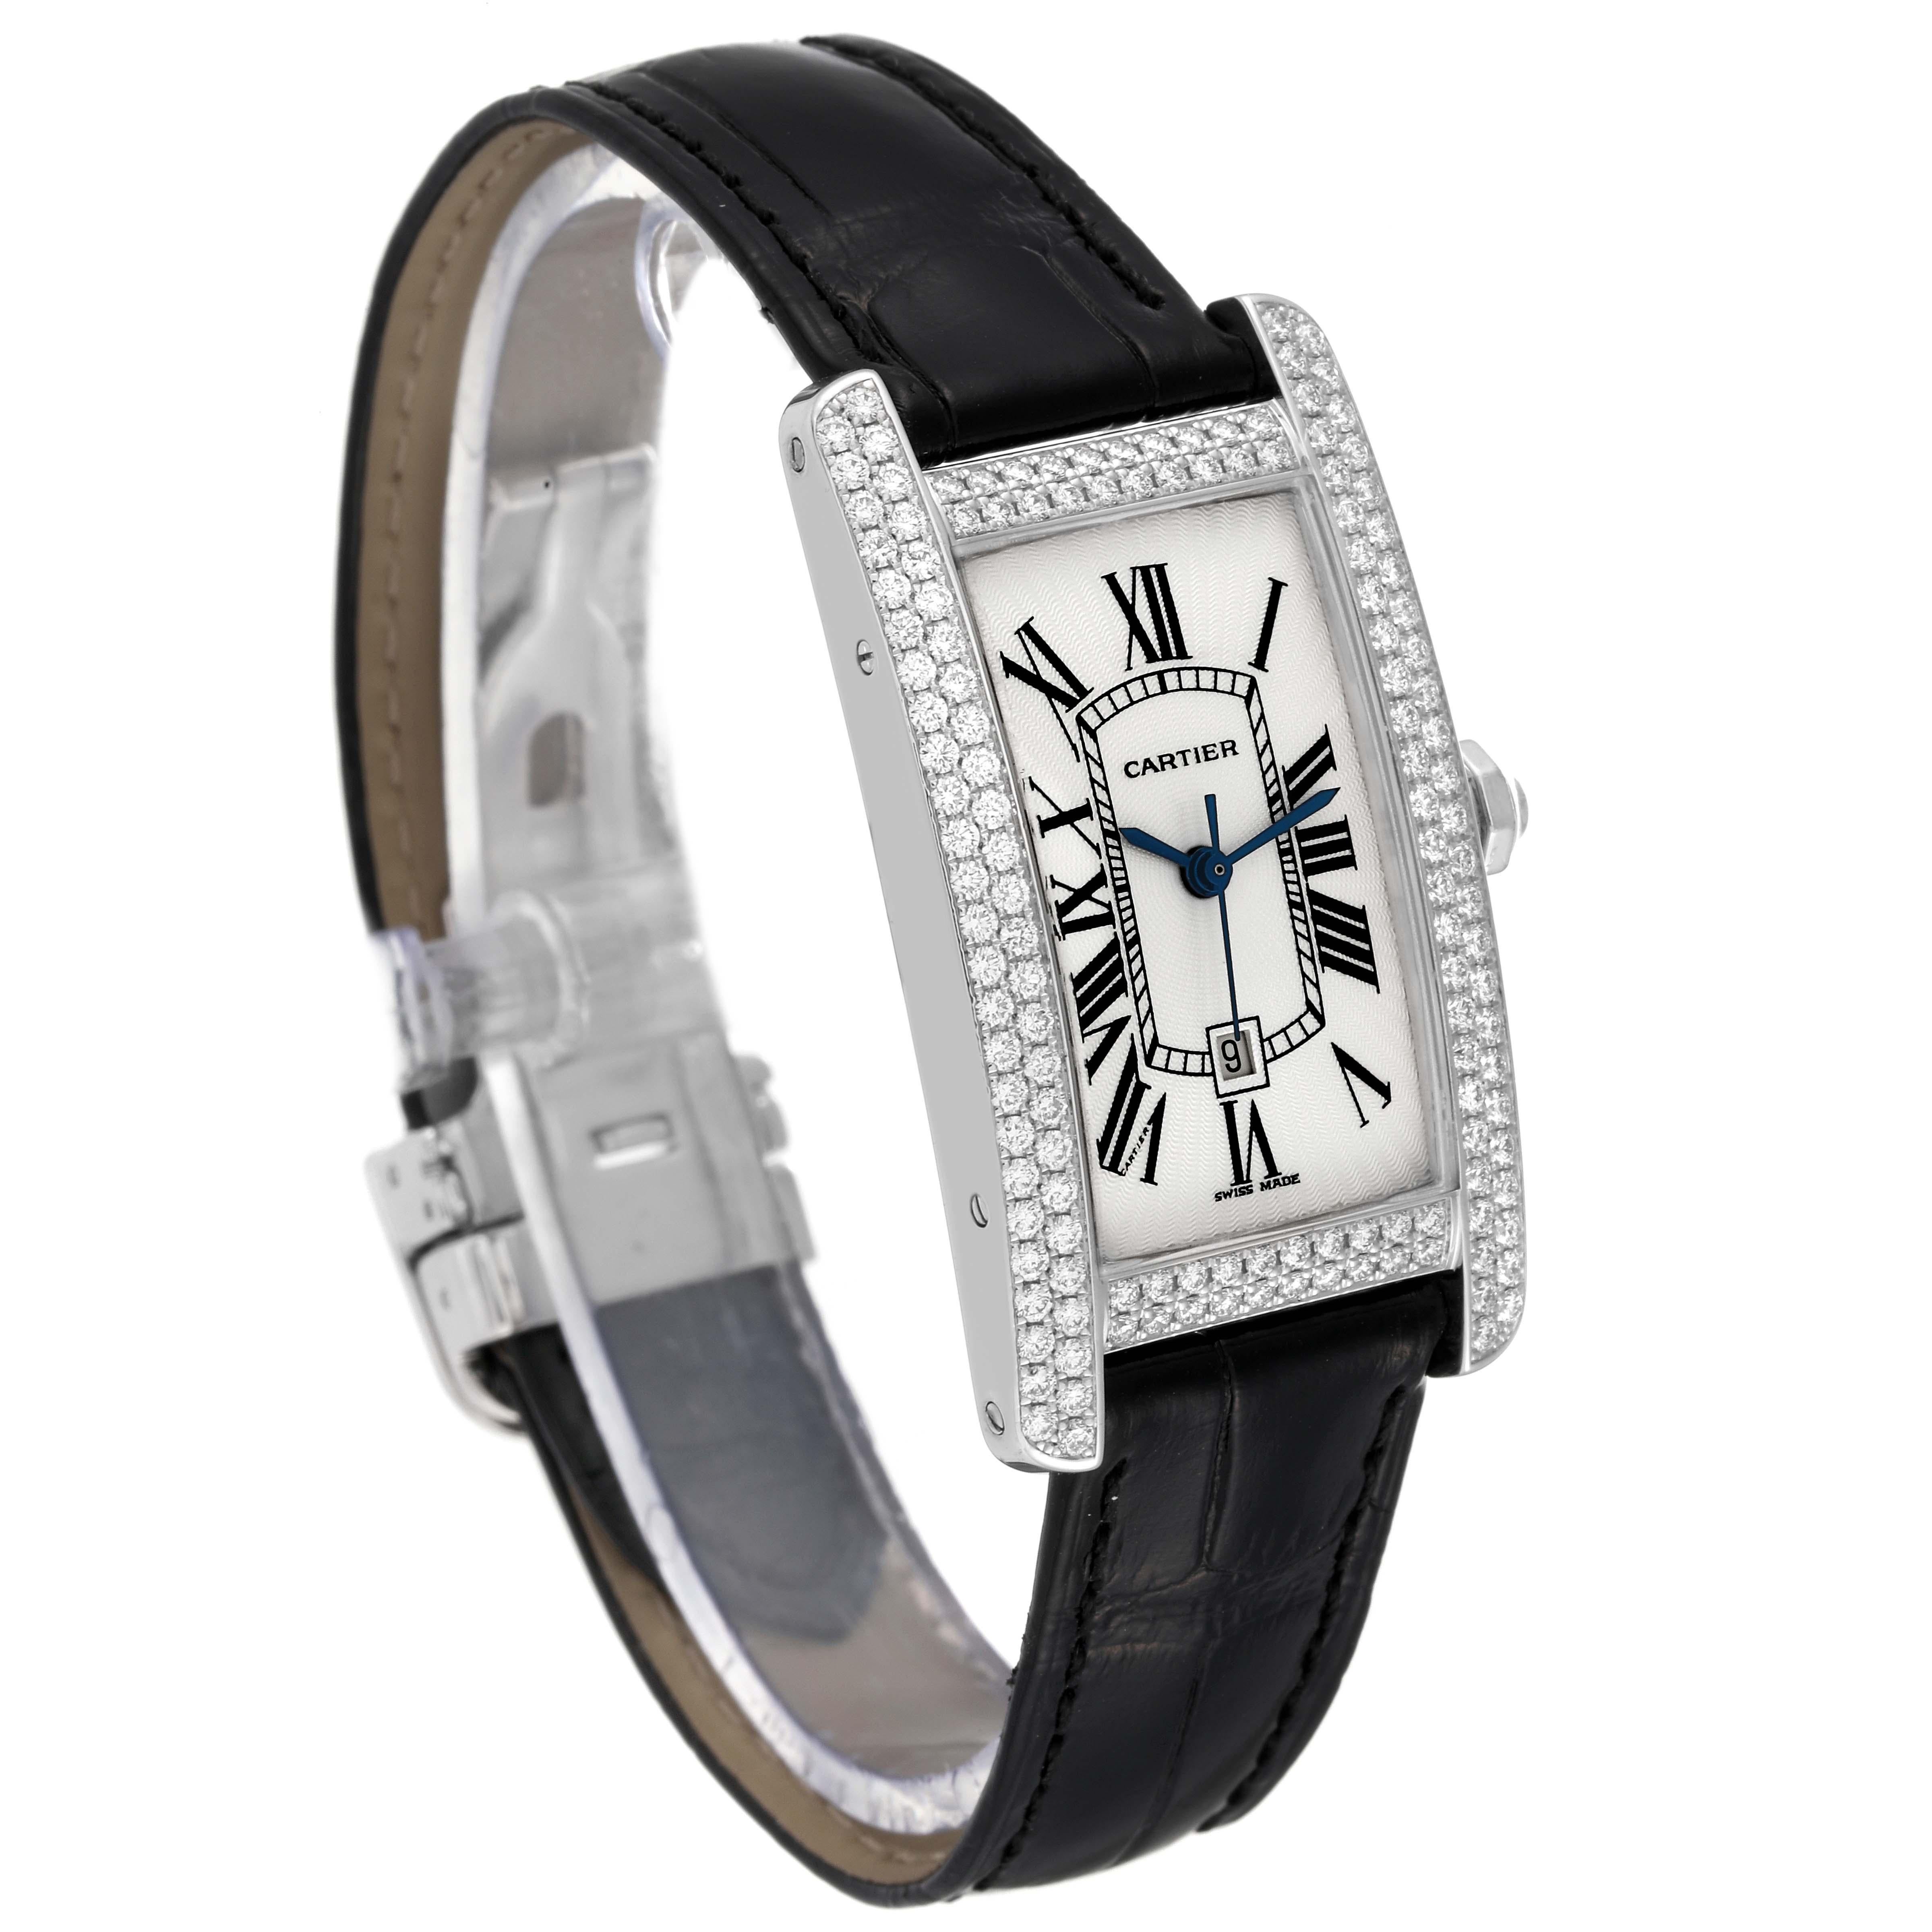 Cartier Tank Americaine White Gold Diamond Ladies Watch 2490 In Excellent Condition For Sale In Atlanta, GA